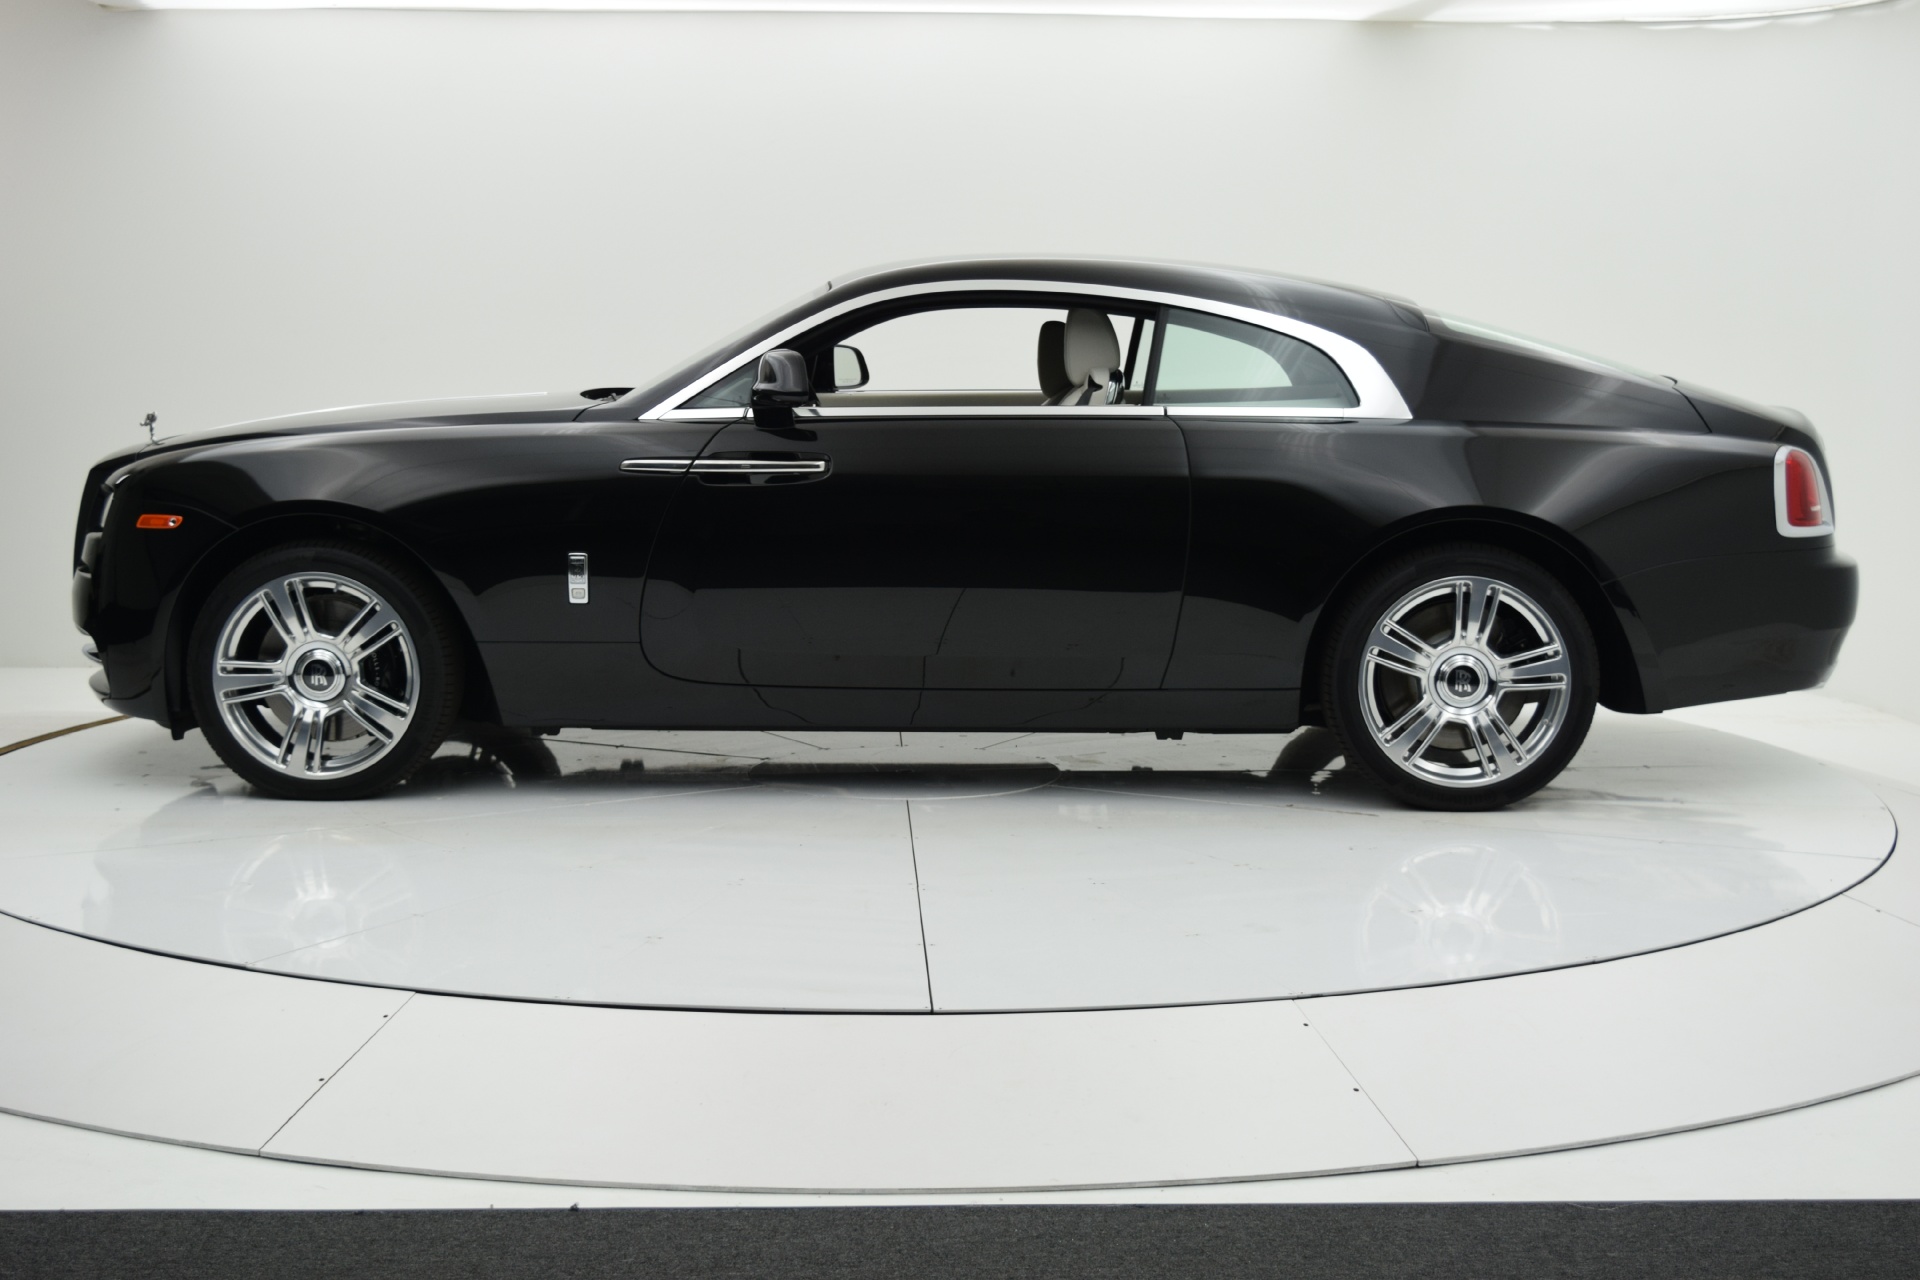 Ghost hunting in the Rolls Royce Wraith